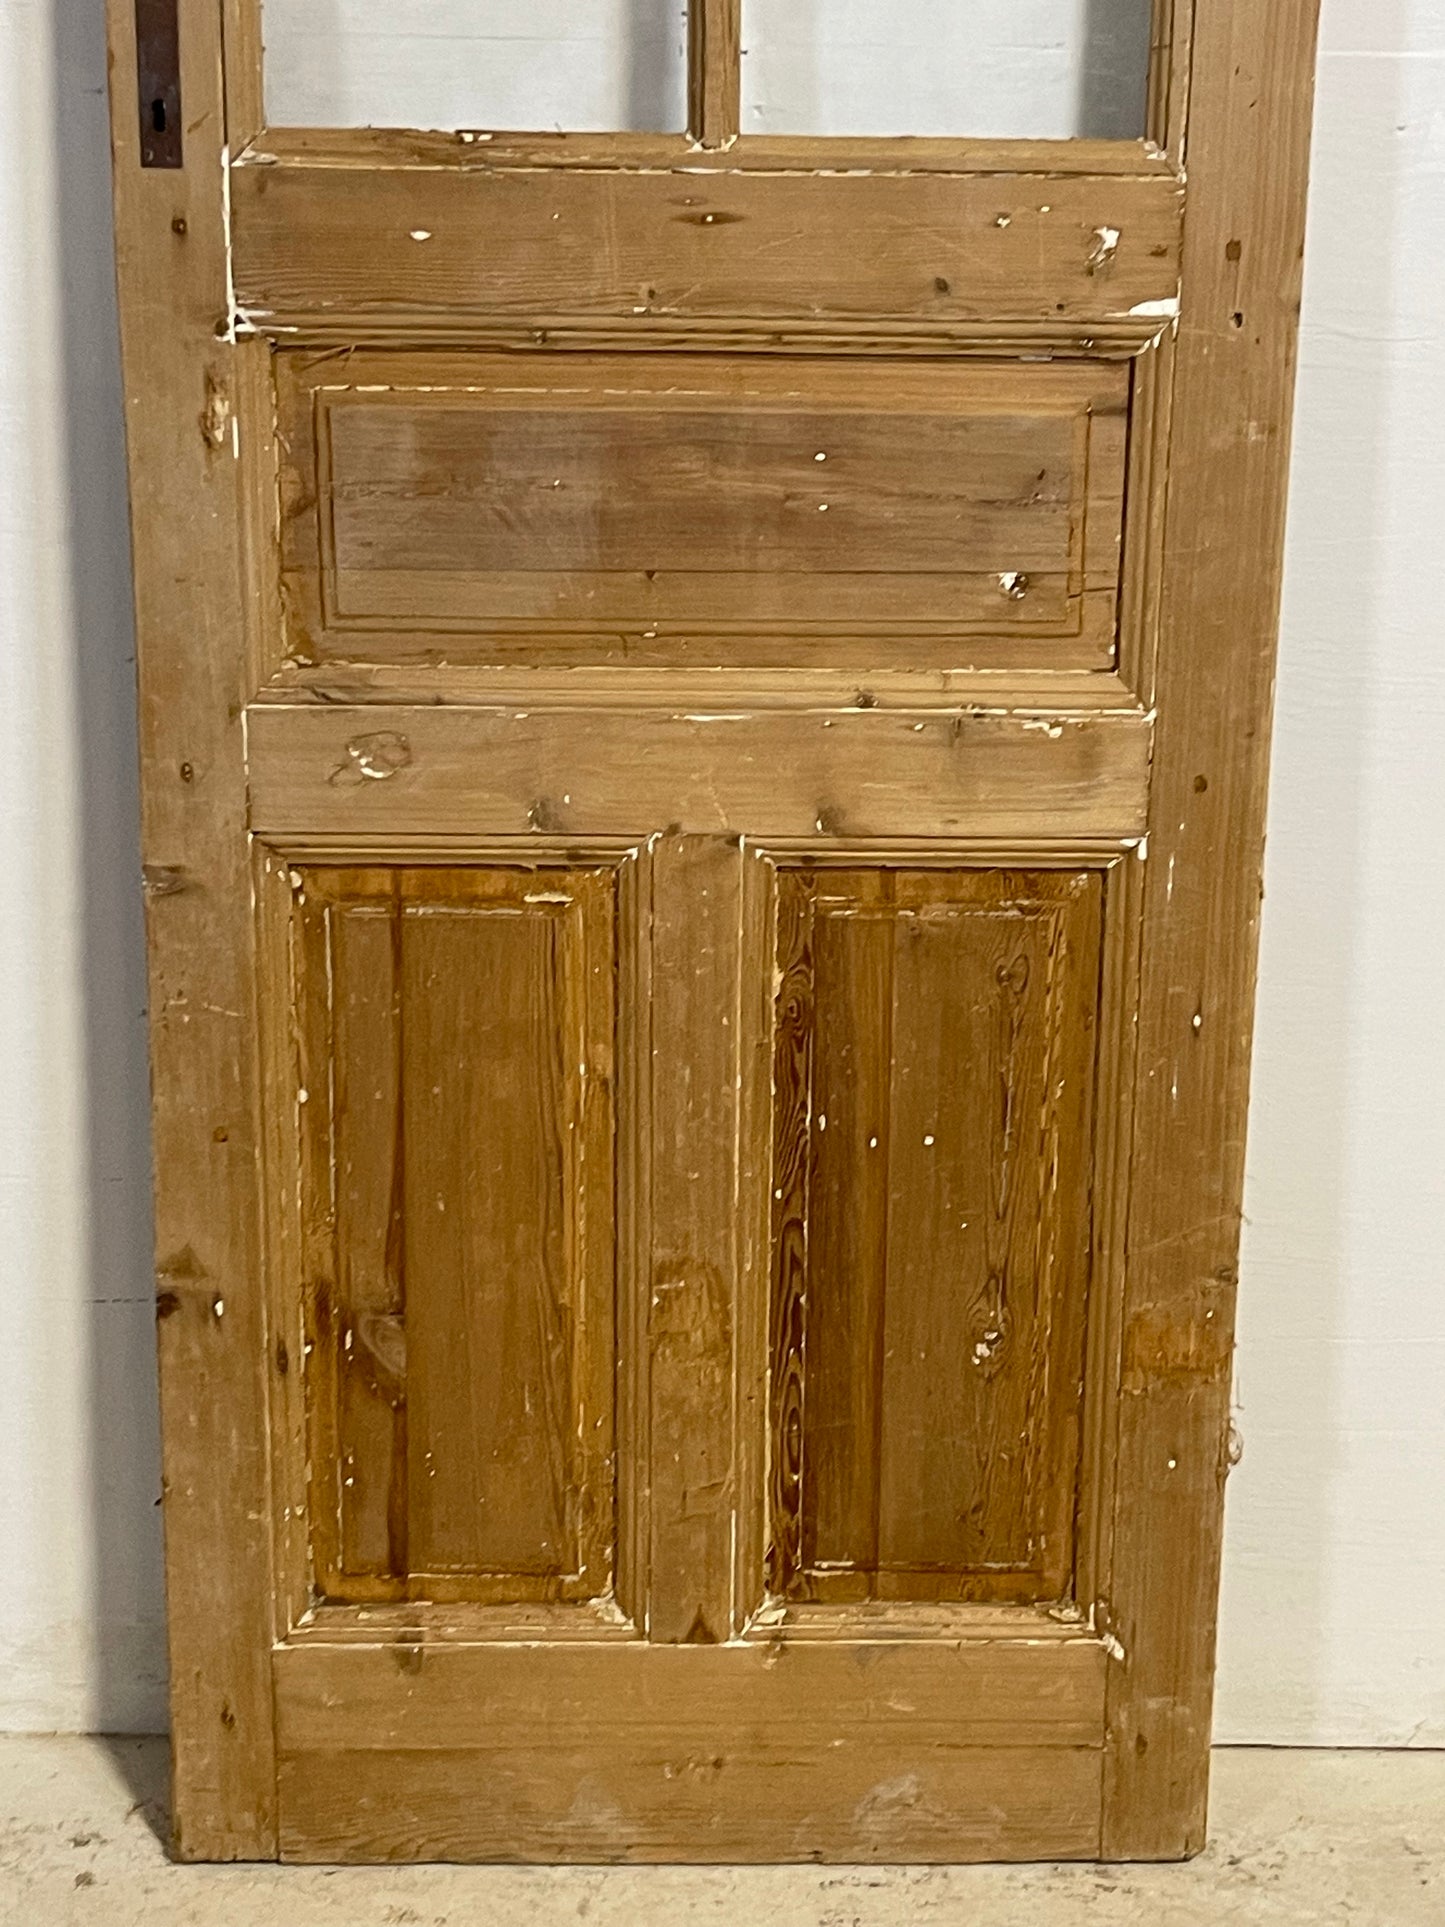 Antique French Panel Door with Glass  (92.25x28.5) L254